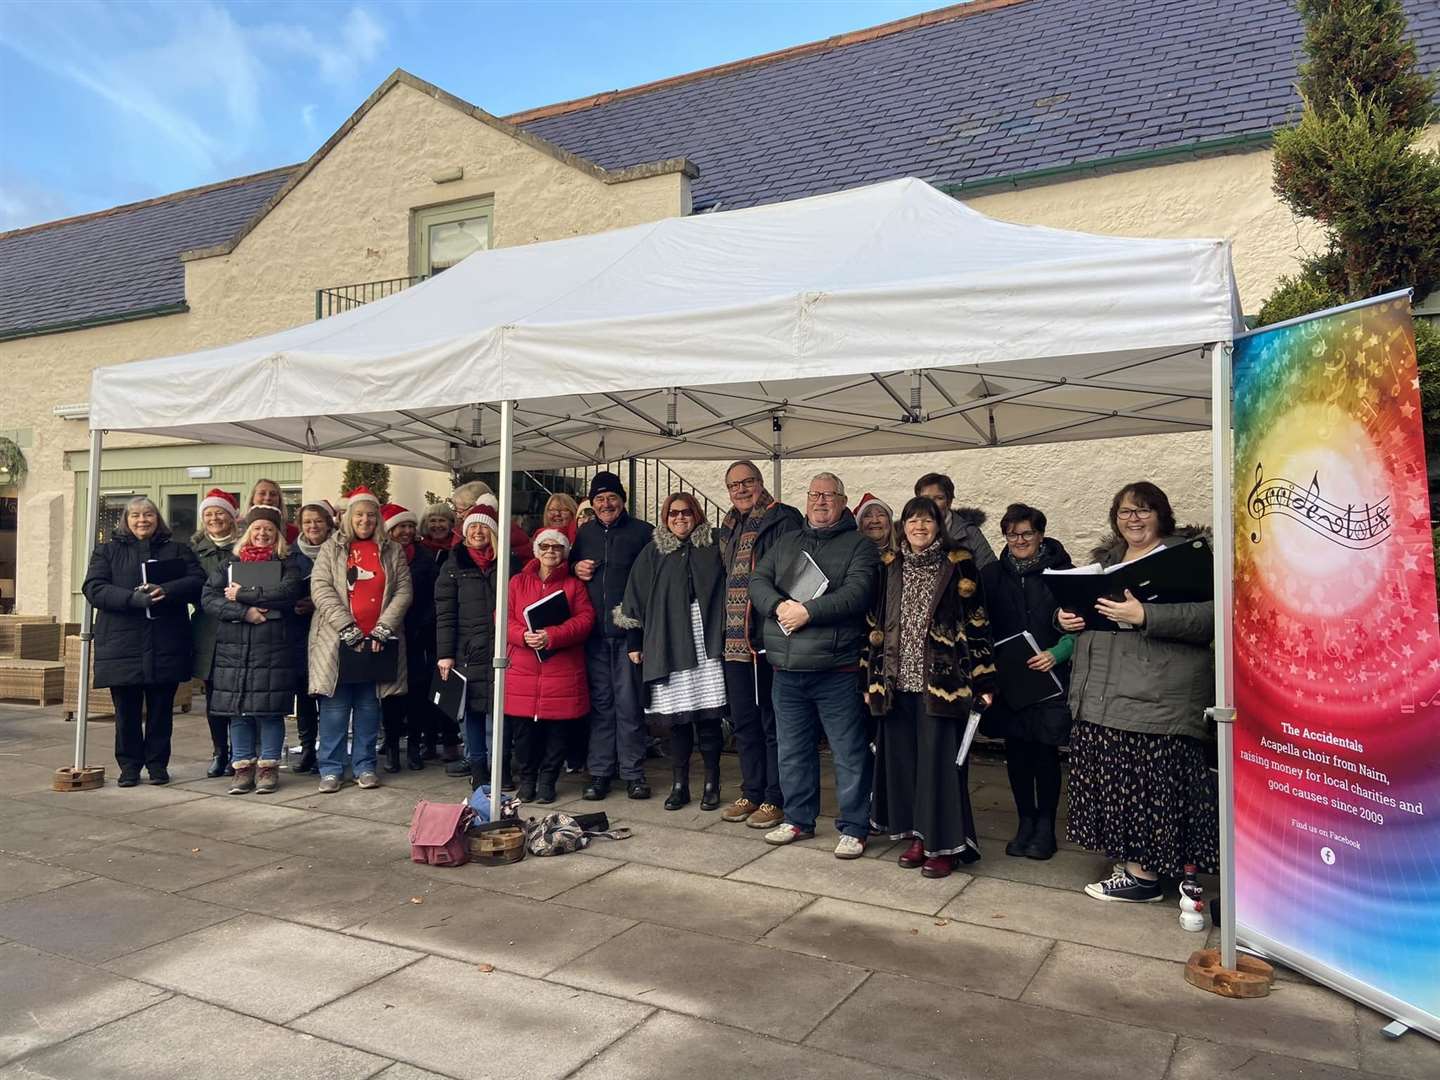 The choir had a succesful lead up to Christmas, among which was a performance at Logie Steading's Christmas Market.